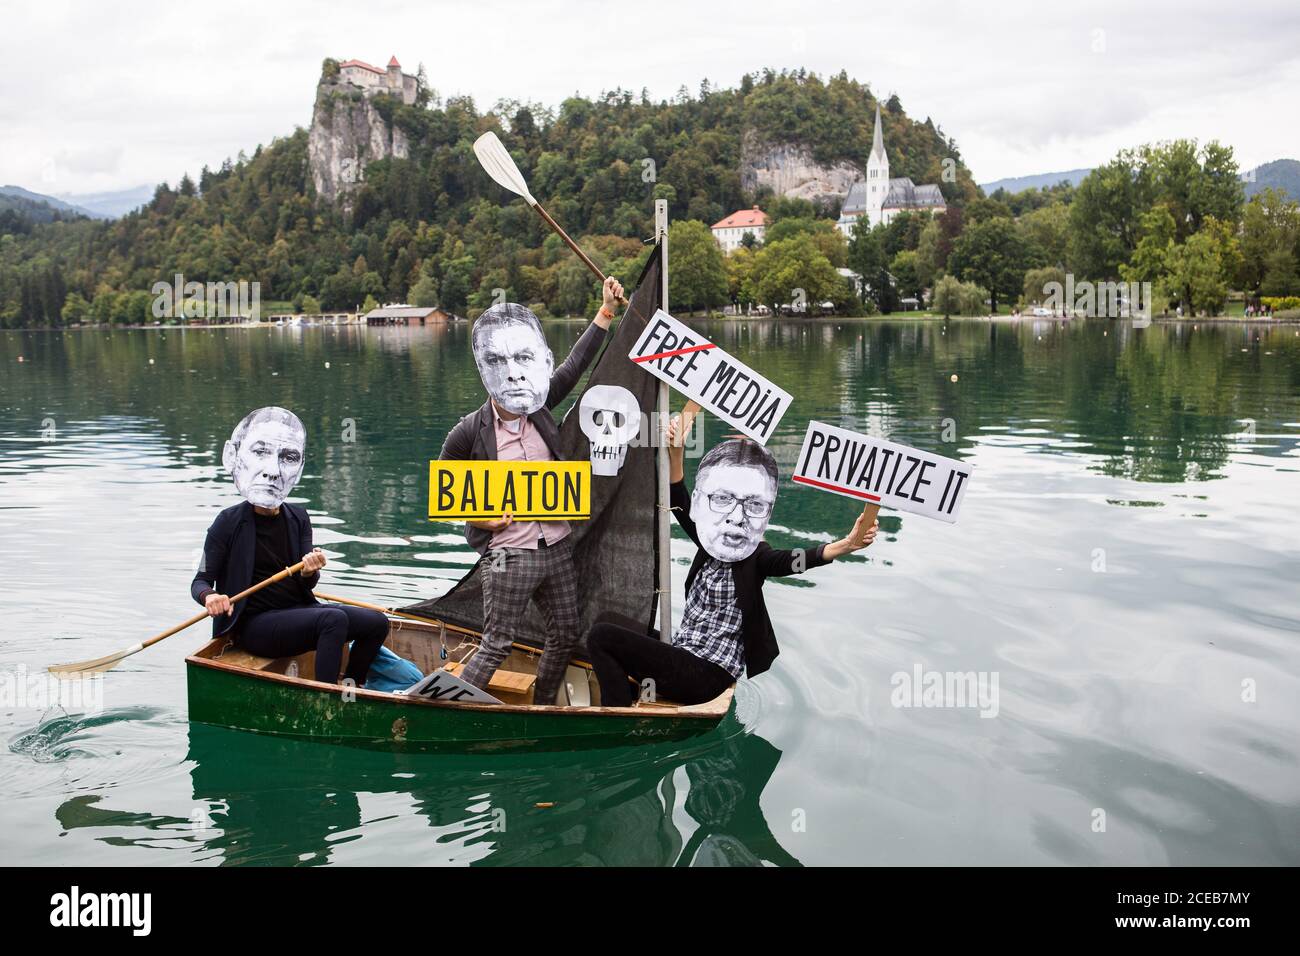 A group of protesters wearing paper masks showing the faces of Slovenian Prime Minister, Janez Jansa, Hungarian Prime Minister, Viktor Orban and Serbian president, Aleksandar Vucic row a small sailboat on Lake Bled protesting against their politics and the rise of fascism in Europe.The protest was held alongside the 15th Bled Strategic Forum where Slovenian Prime Minister Janez Jansa hosted the Hungarian Prime Minister Viktor Orban and Serbian president Aleksandar Vucic, as well as prime ministers of Czech Republic, Bulgaria, Poland, Croatia and others. Stock Photo